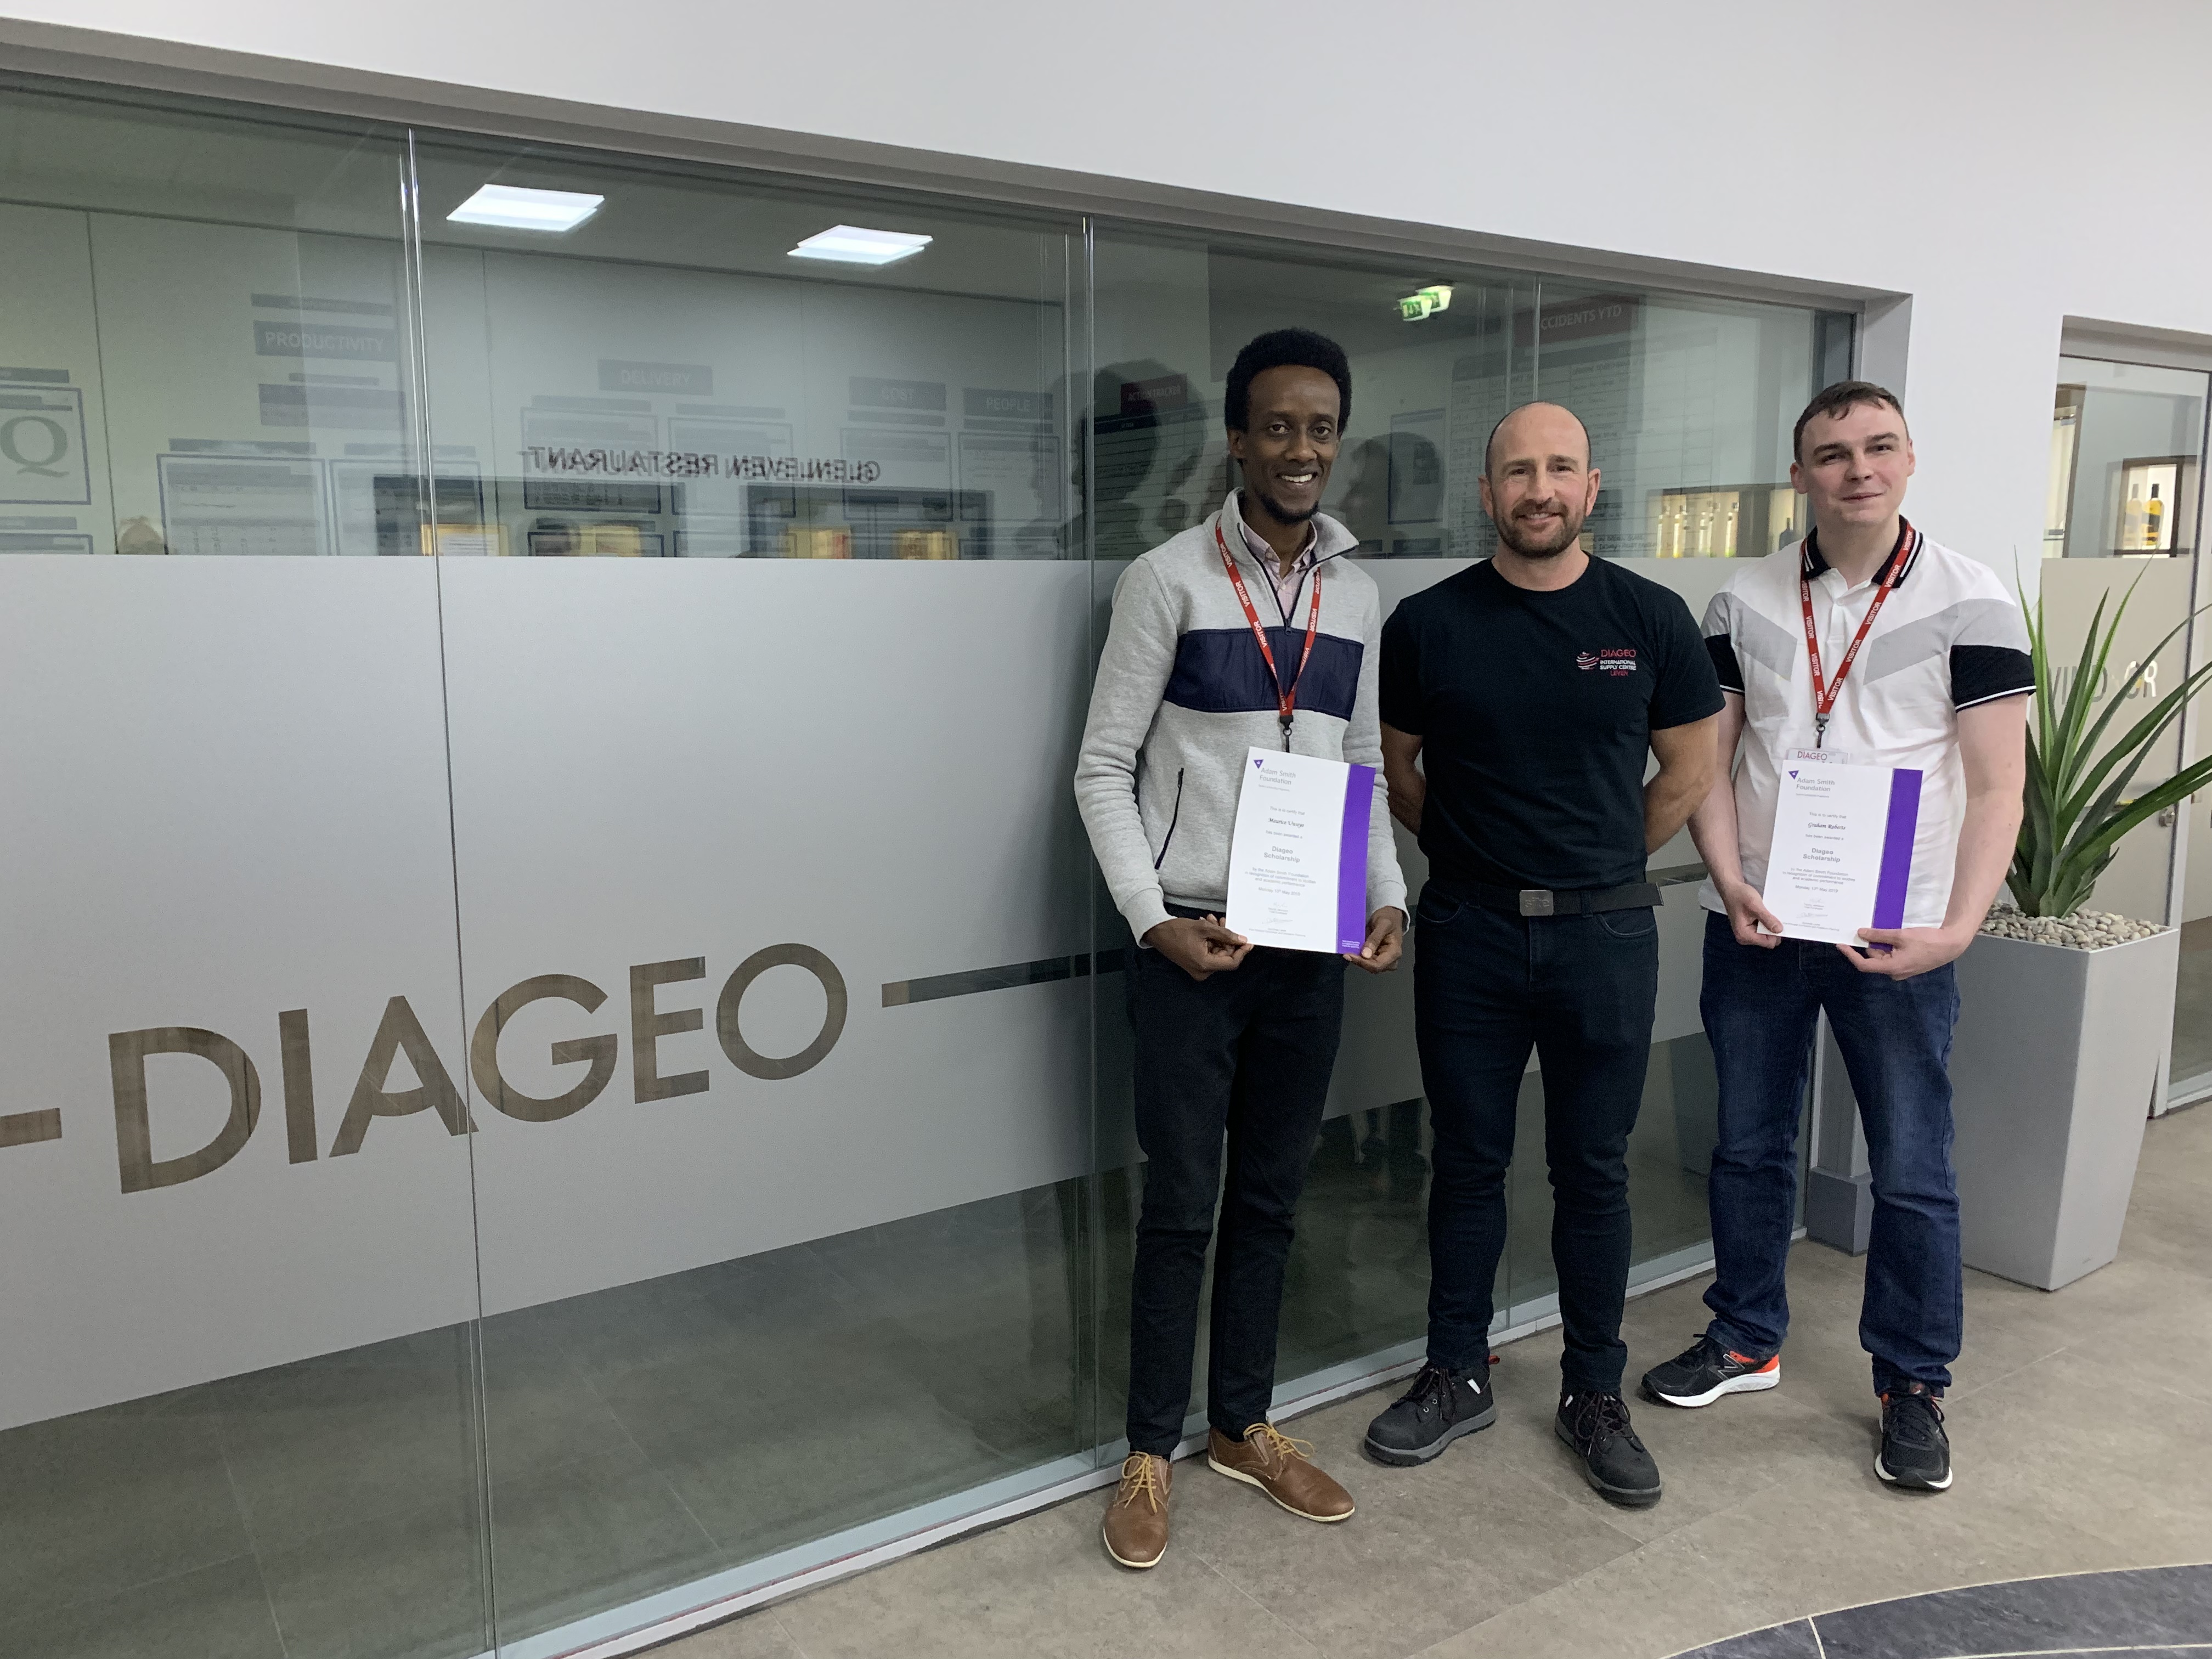 Students Cheer Scholarship Support from Diageo 